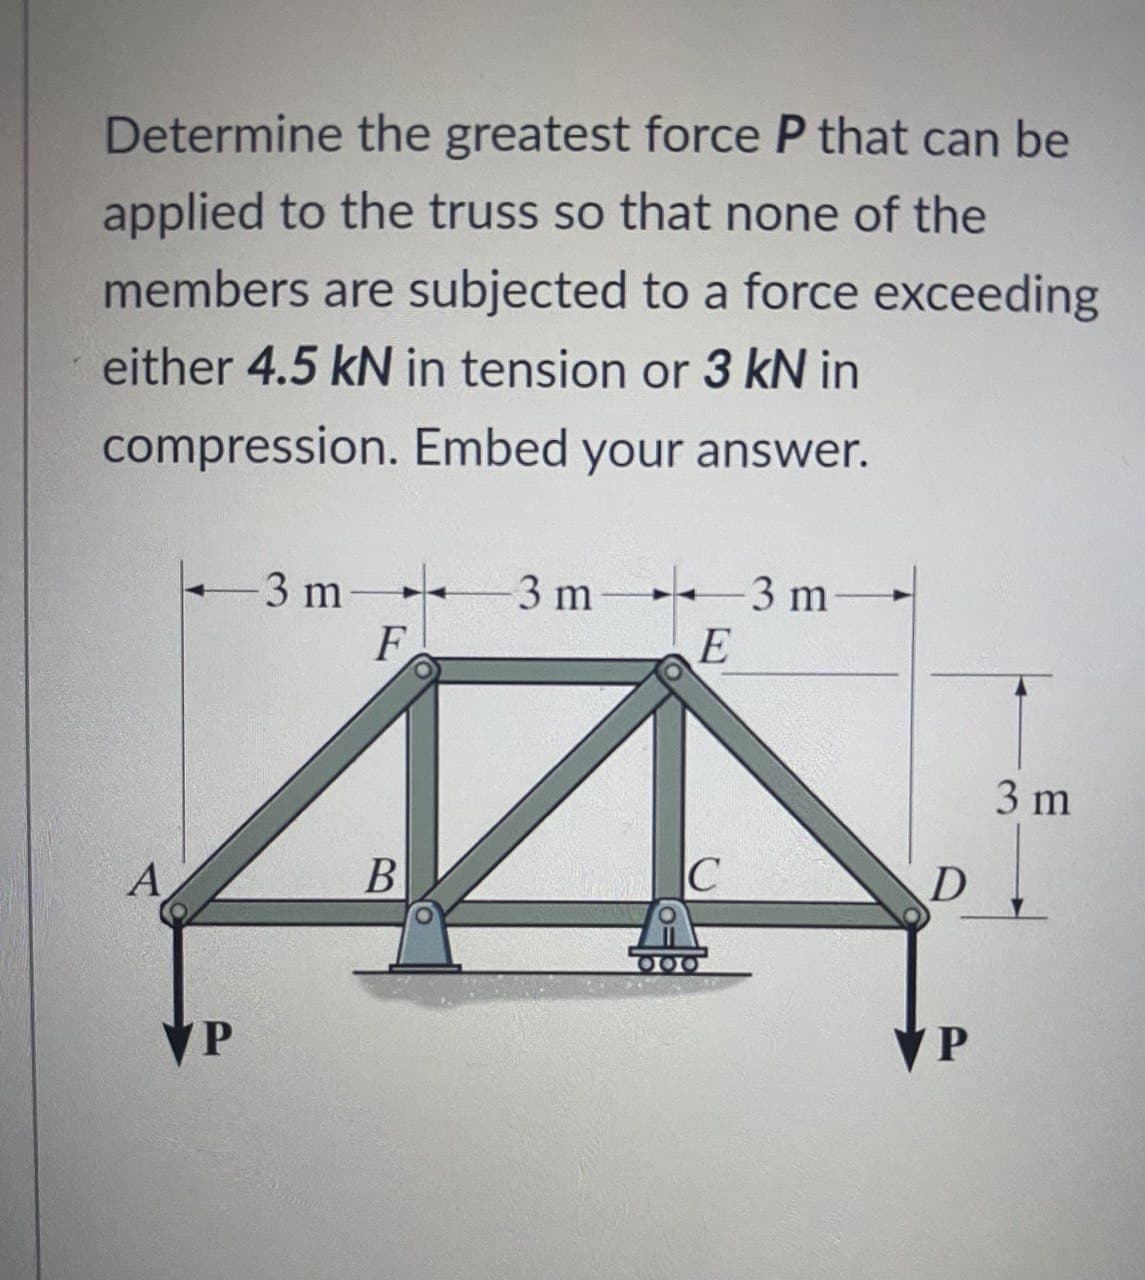 Determine the greatest force P that can be
applied to the truss so that none of the
members are subjected to a force exceeding
either 4.5 kN in tension or 3 kN in
compression. Embed your answer.
3 m +
F
3 m
3 m
E
3 m
A
B
VP
VP
